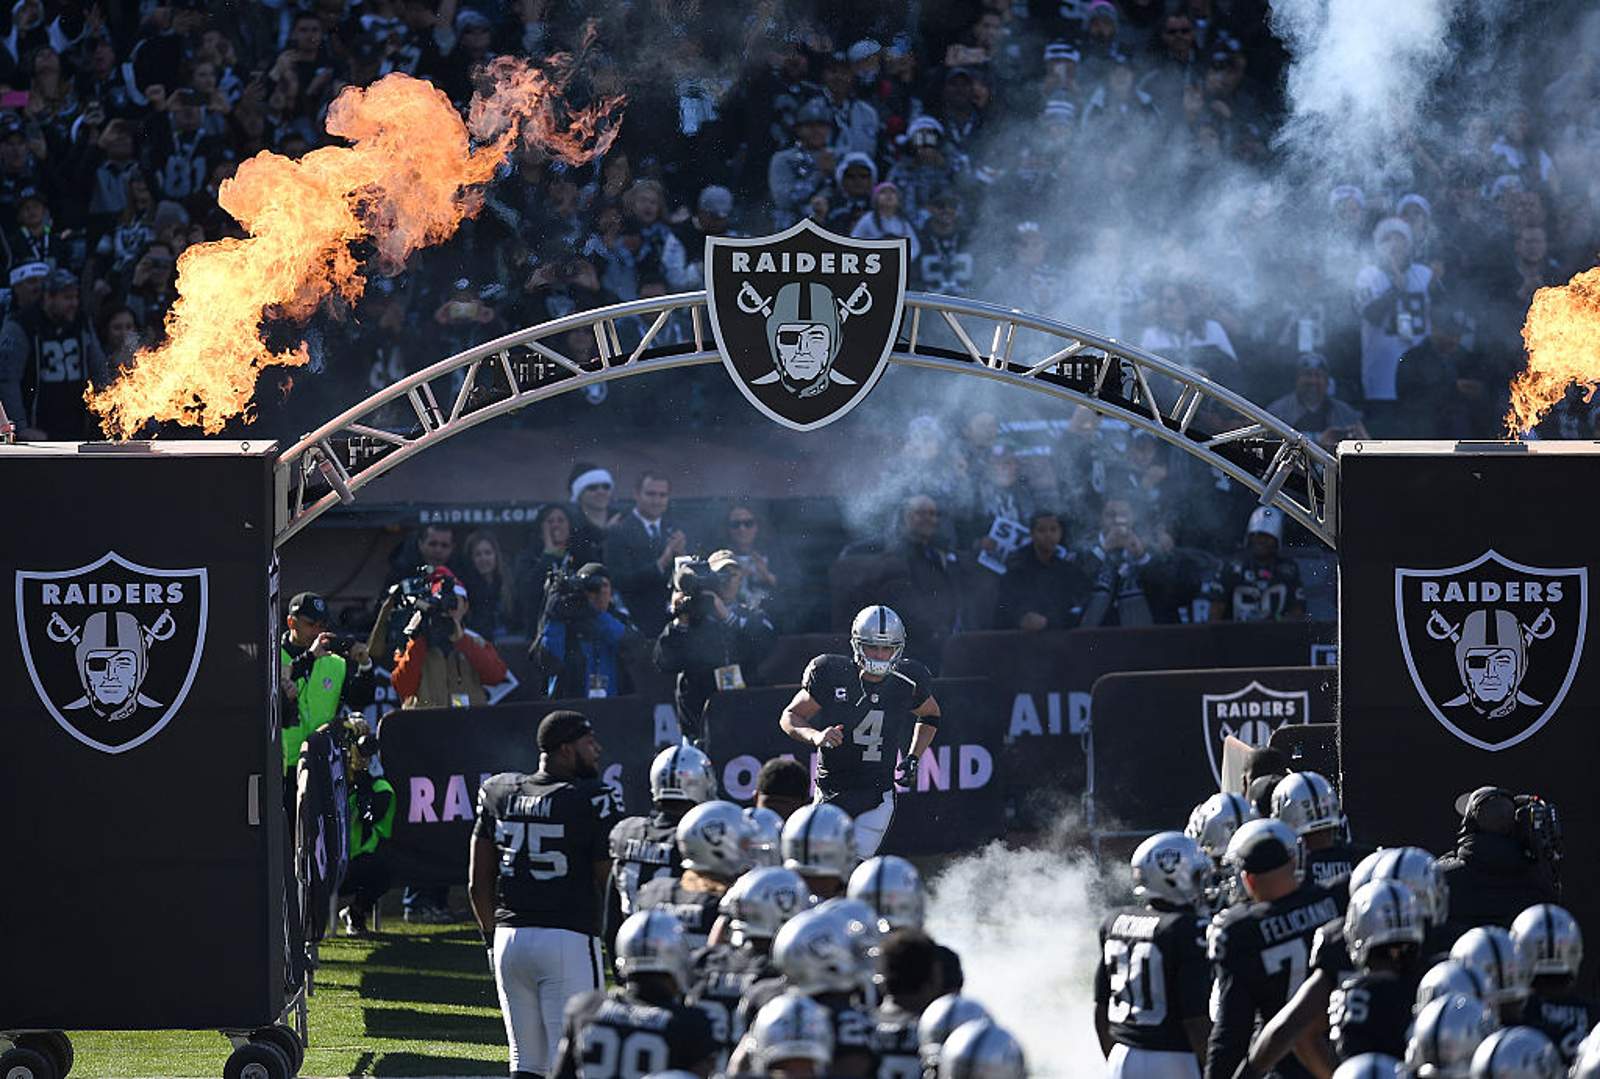 It's Official: The Raiders are Relocating